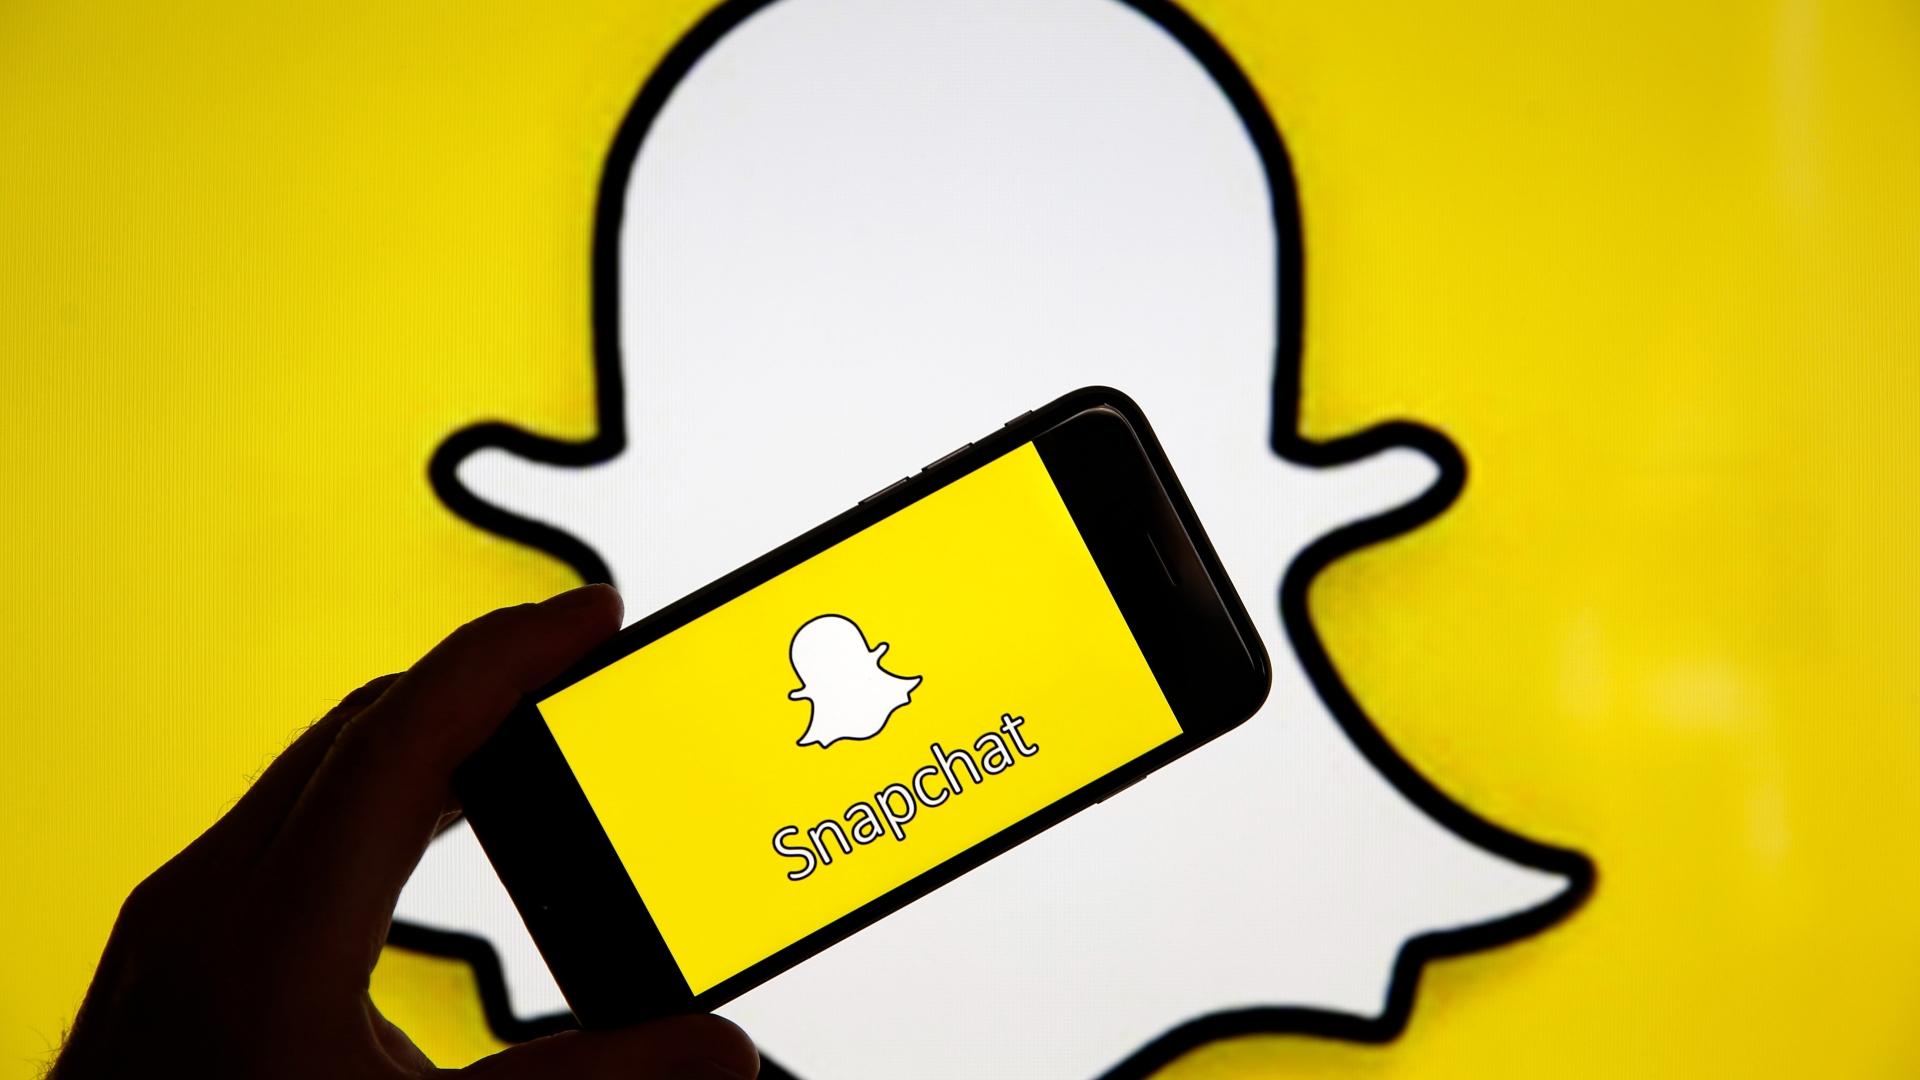 Parents can now see WHO their children are messaging on Snapchat.